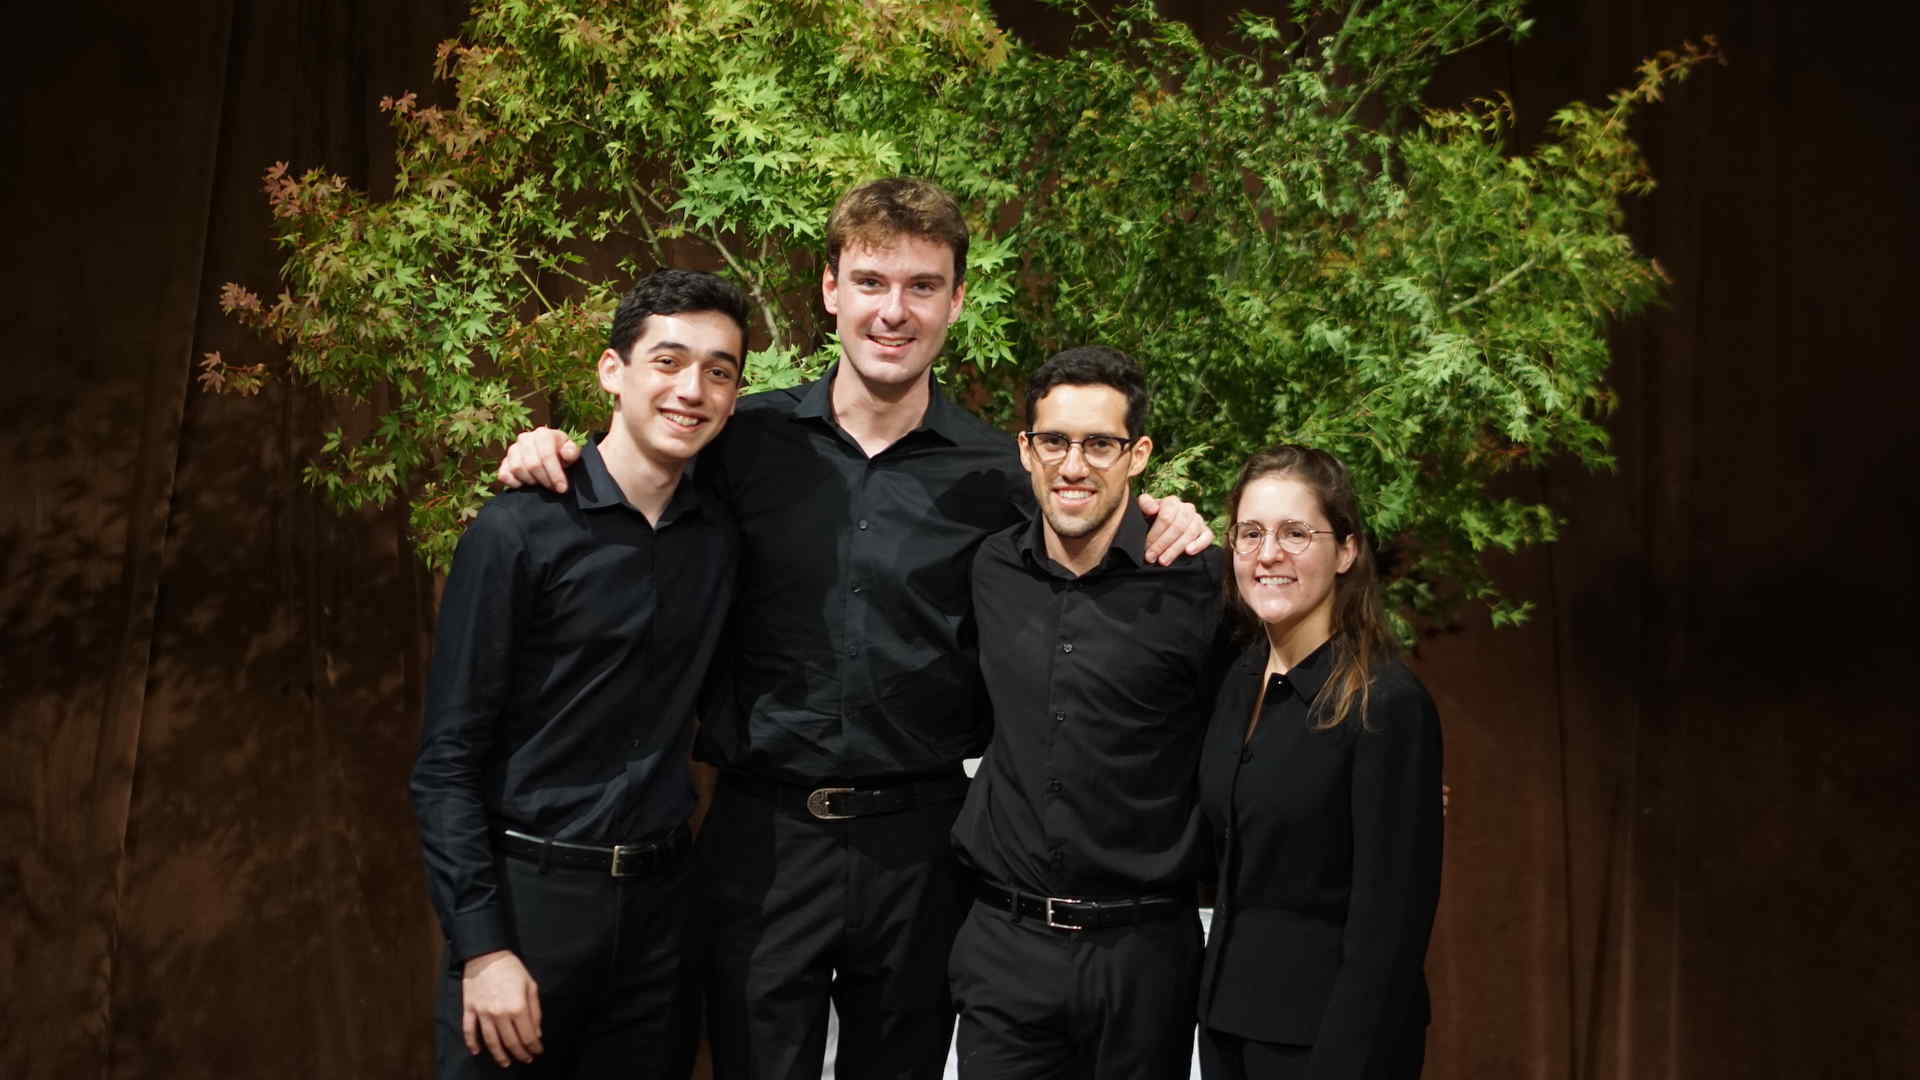 Spencer Rubin and his friends, identified in the photo caption, pose for a group photo in front of a shrub. They are dressed in performance black.